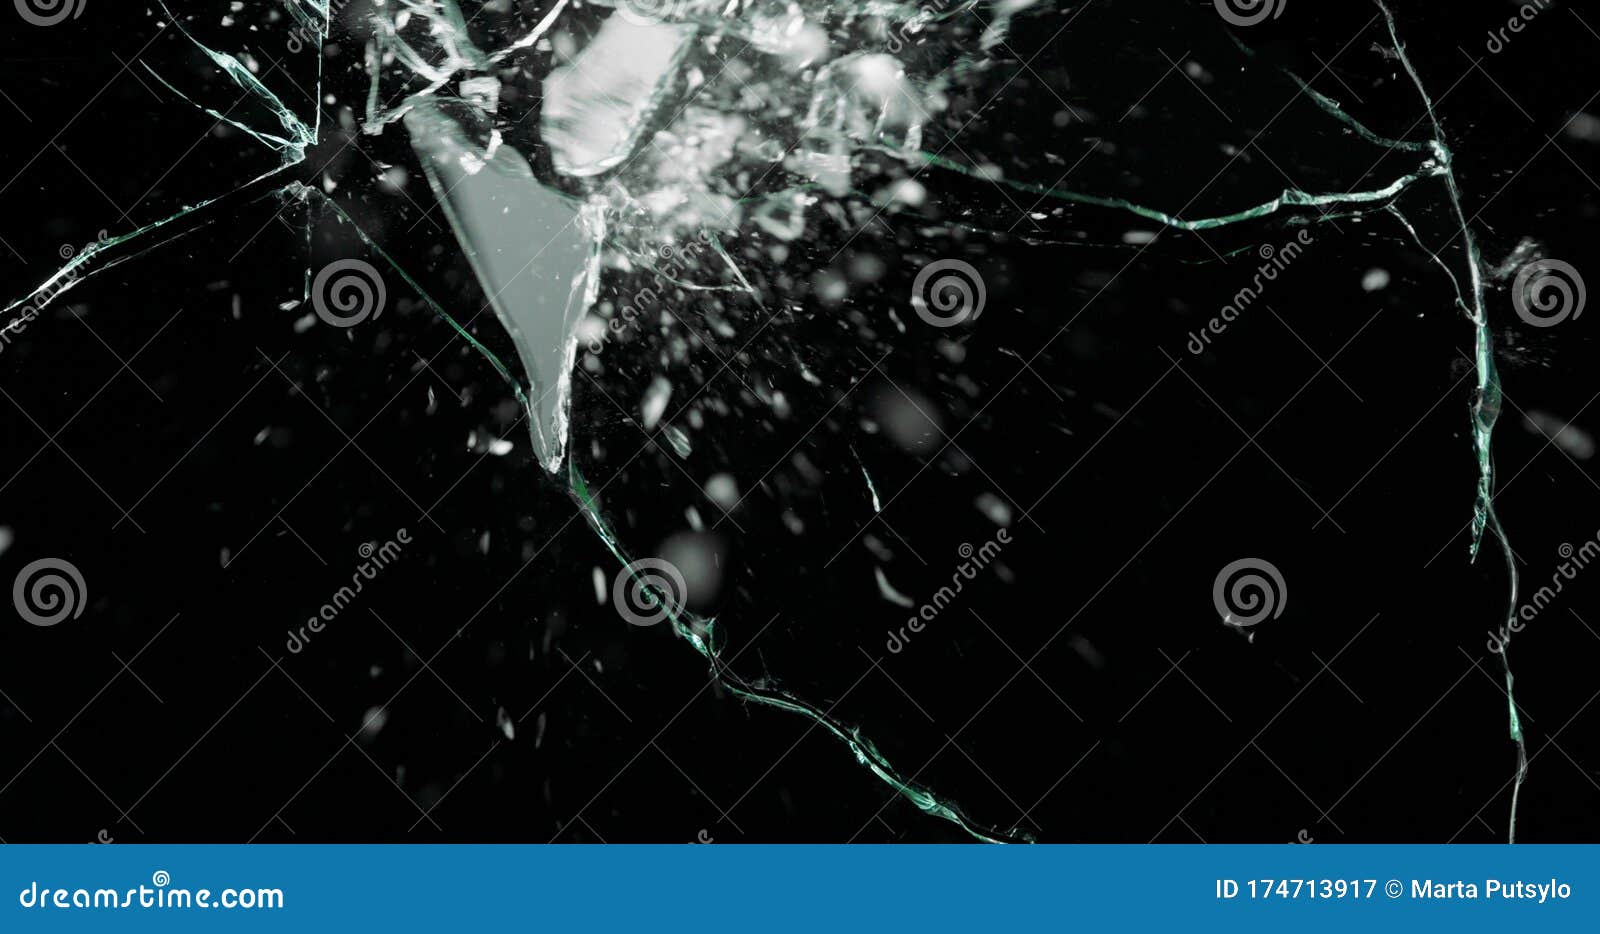 Shatter Mirror Broken Crack Glass Stock Image - Image of abstract, cell:  174713917